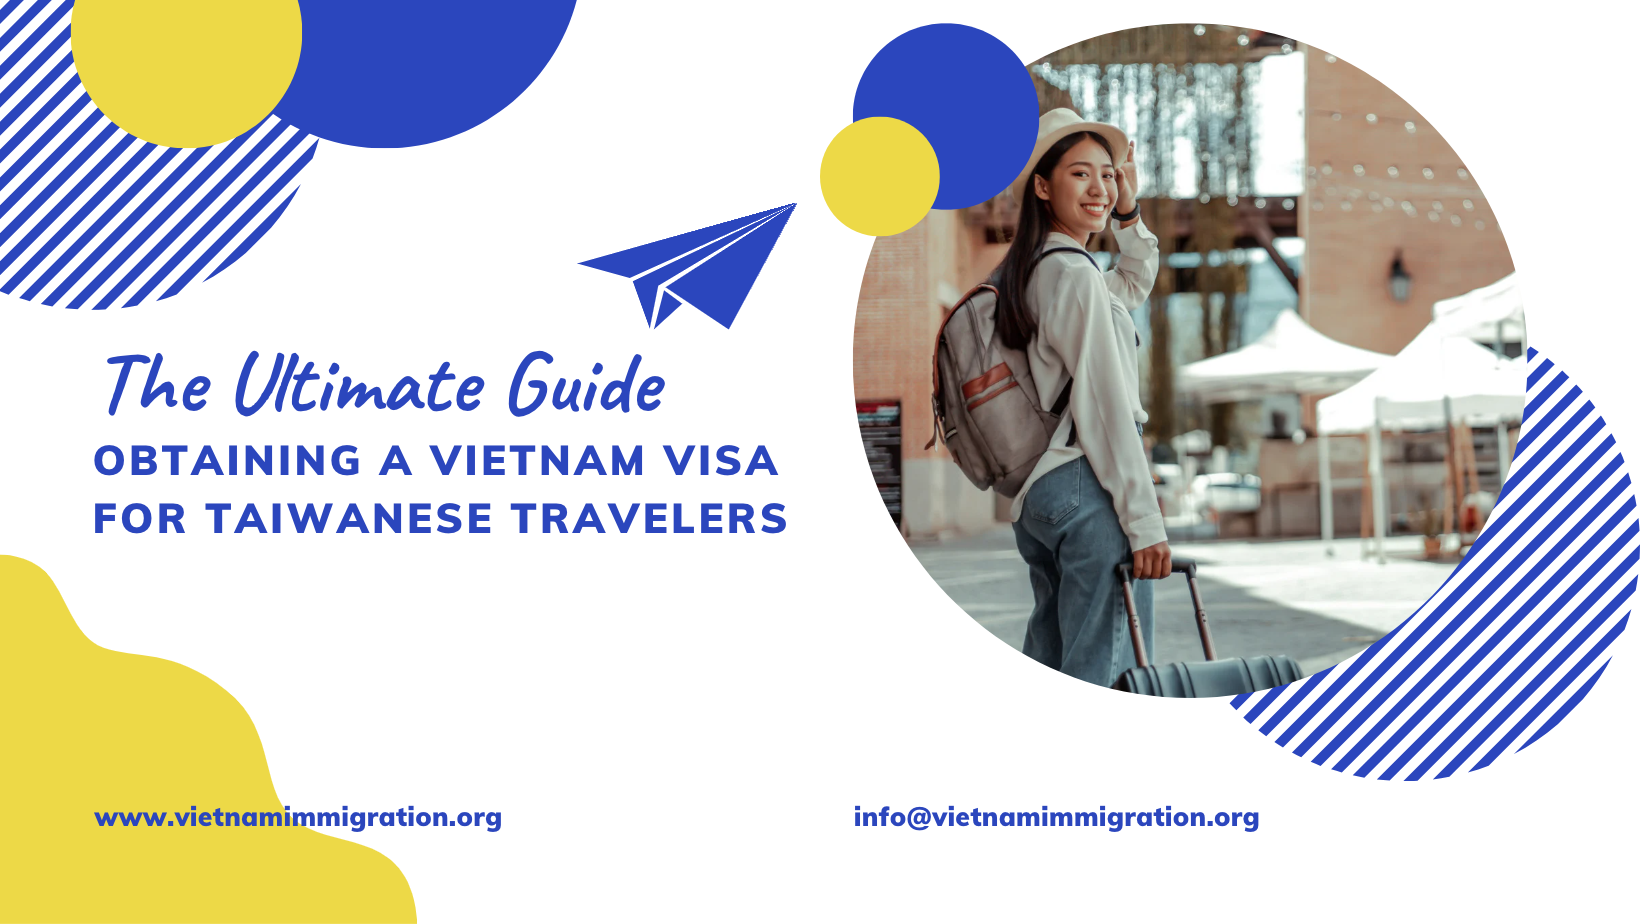 The Ultimate Guide to Obtaining a Vietnam Visa for Taiwanese Travelers